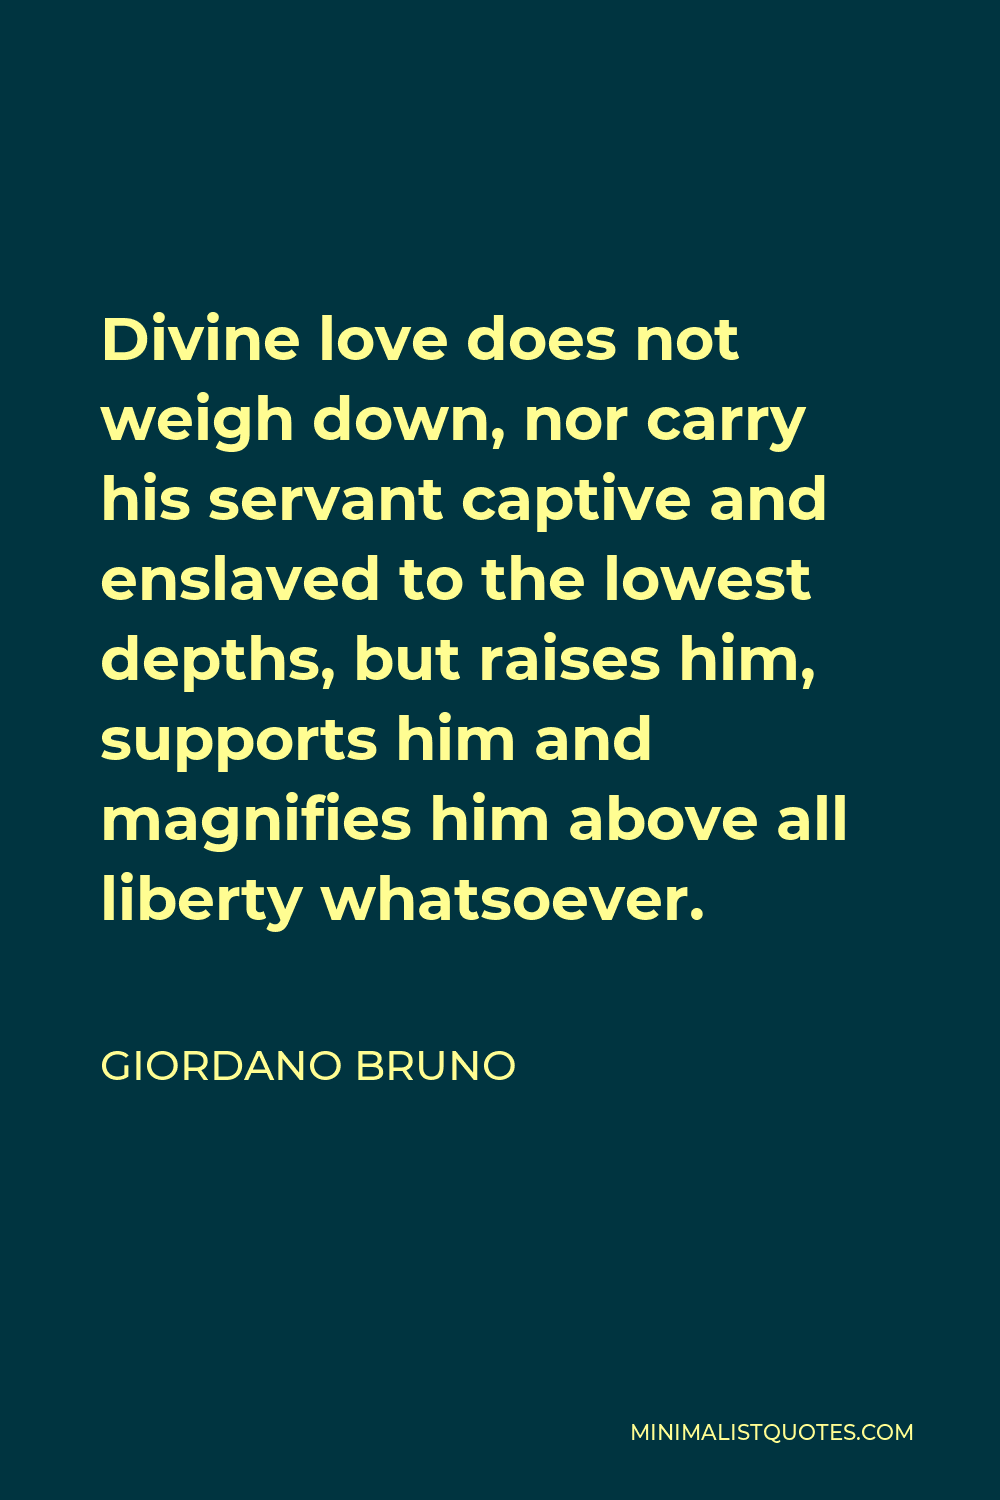 Giordano Bruno Quote - Divine love does not weigh down, nor carry his servant captive and enslaved to the lowest depths, but raises him, supports him and magnifies him above all liberty whatsoever.